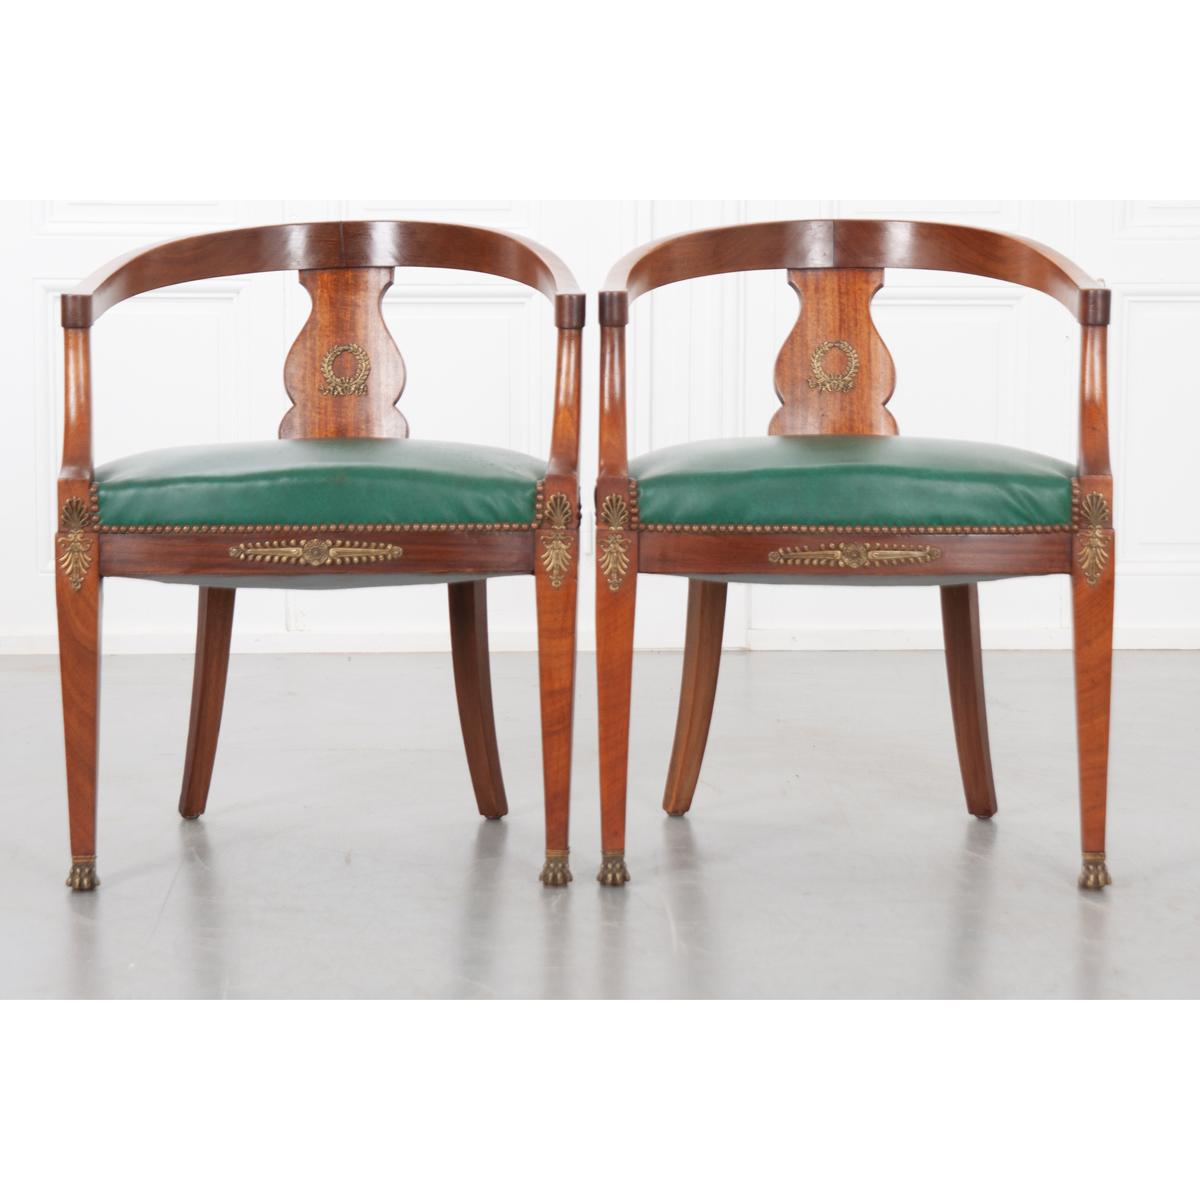 A superb pair of Empire-Style barrel back chairs. These classically styled mahogany chairs have green vintage vinyl upholstered cushions trimmed with a nailhead border. The concave back has a shaped backrest with an ormolu wreath at its center. The